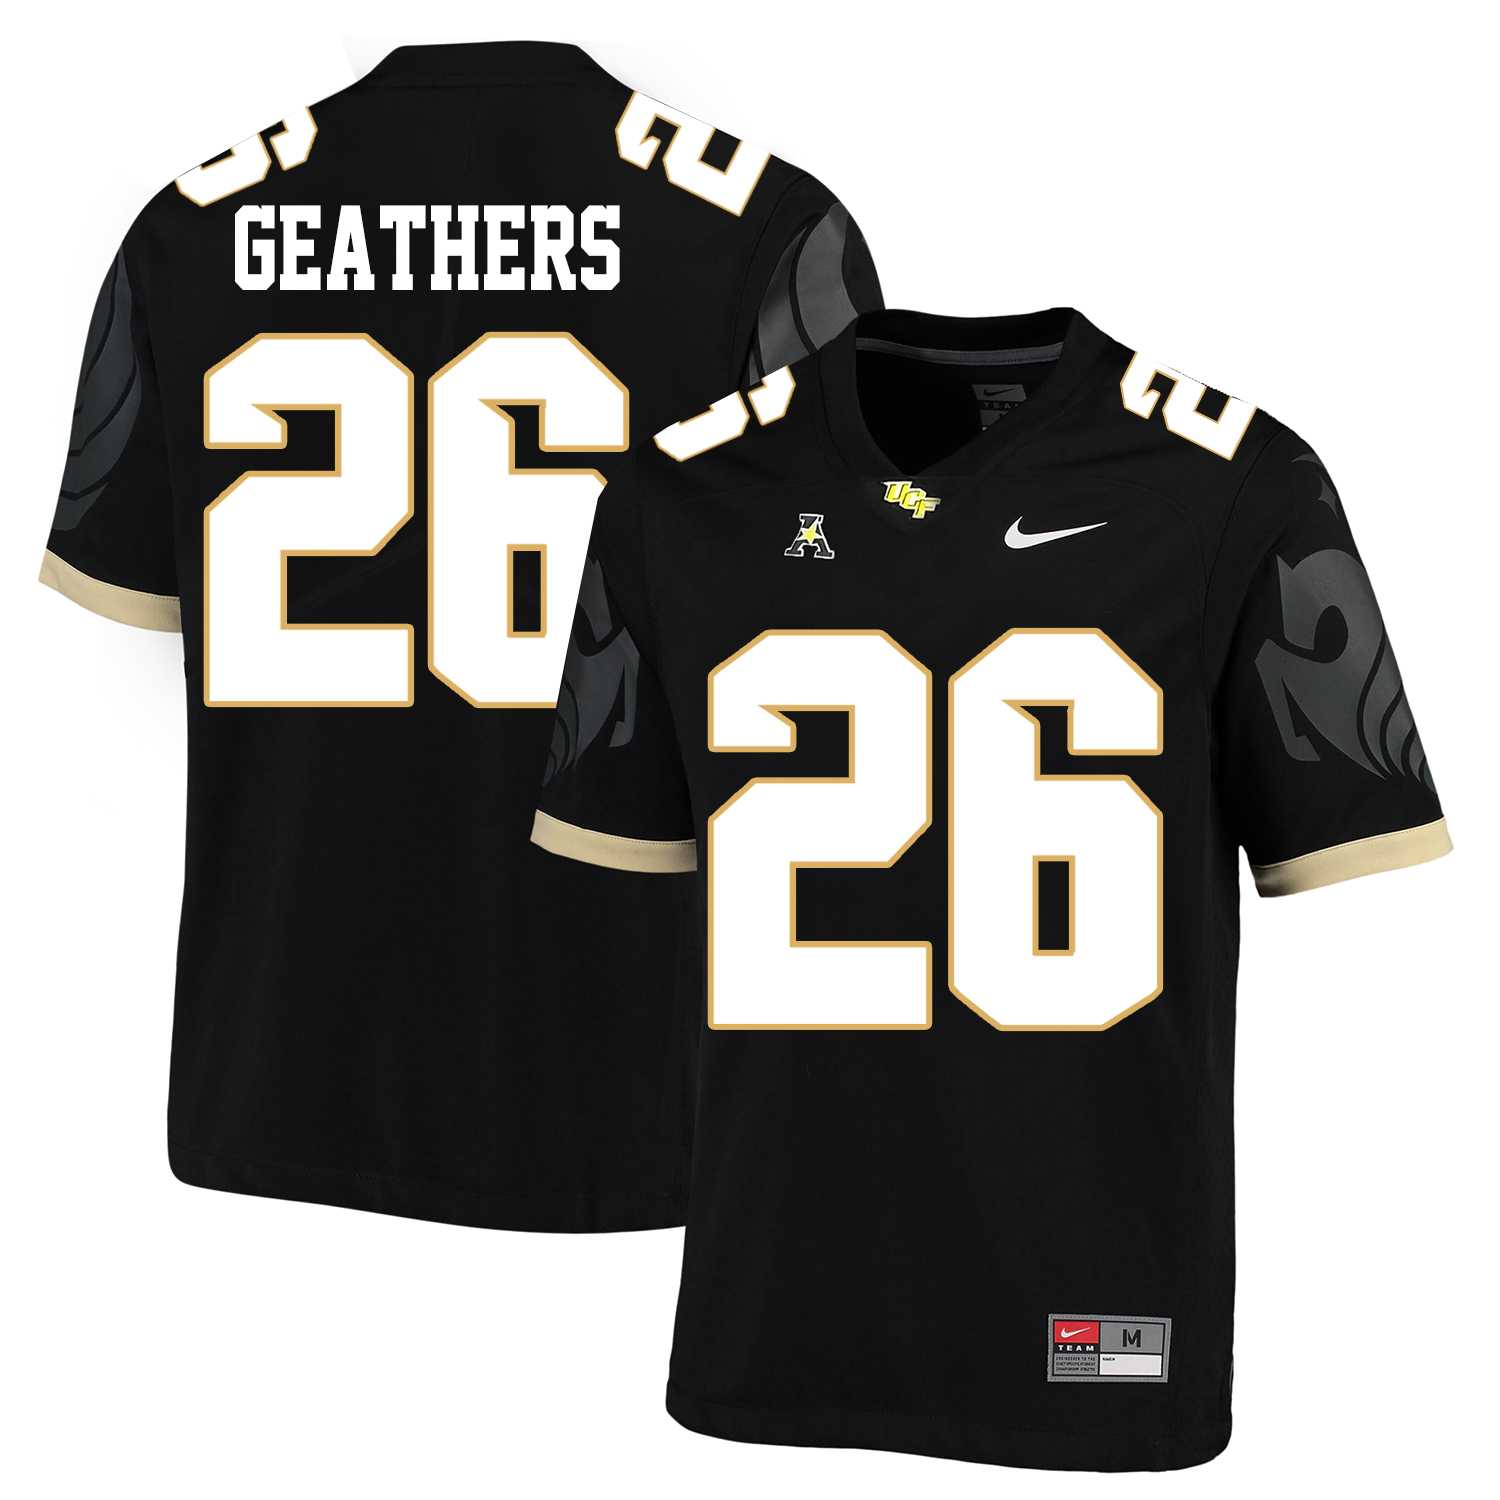 UCF Knights #26 Clayton Geathers Black College Football Jersey